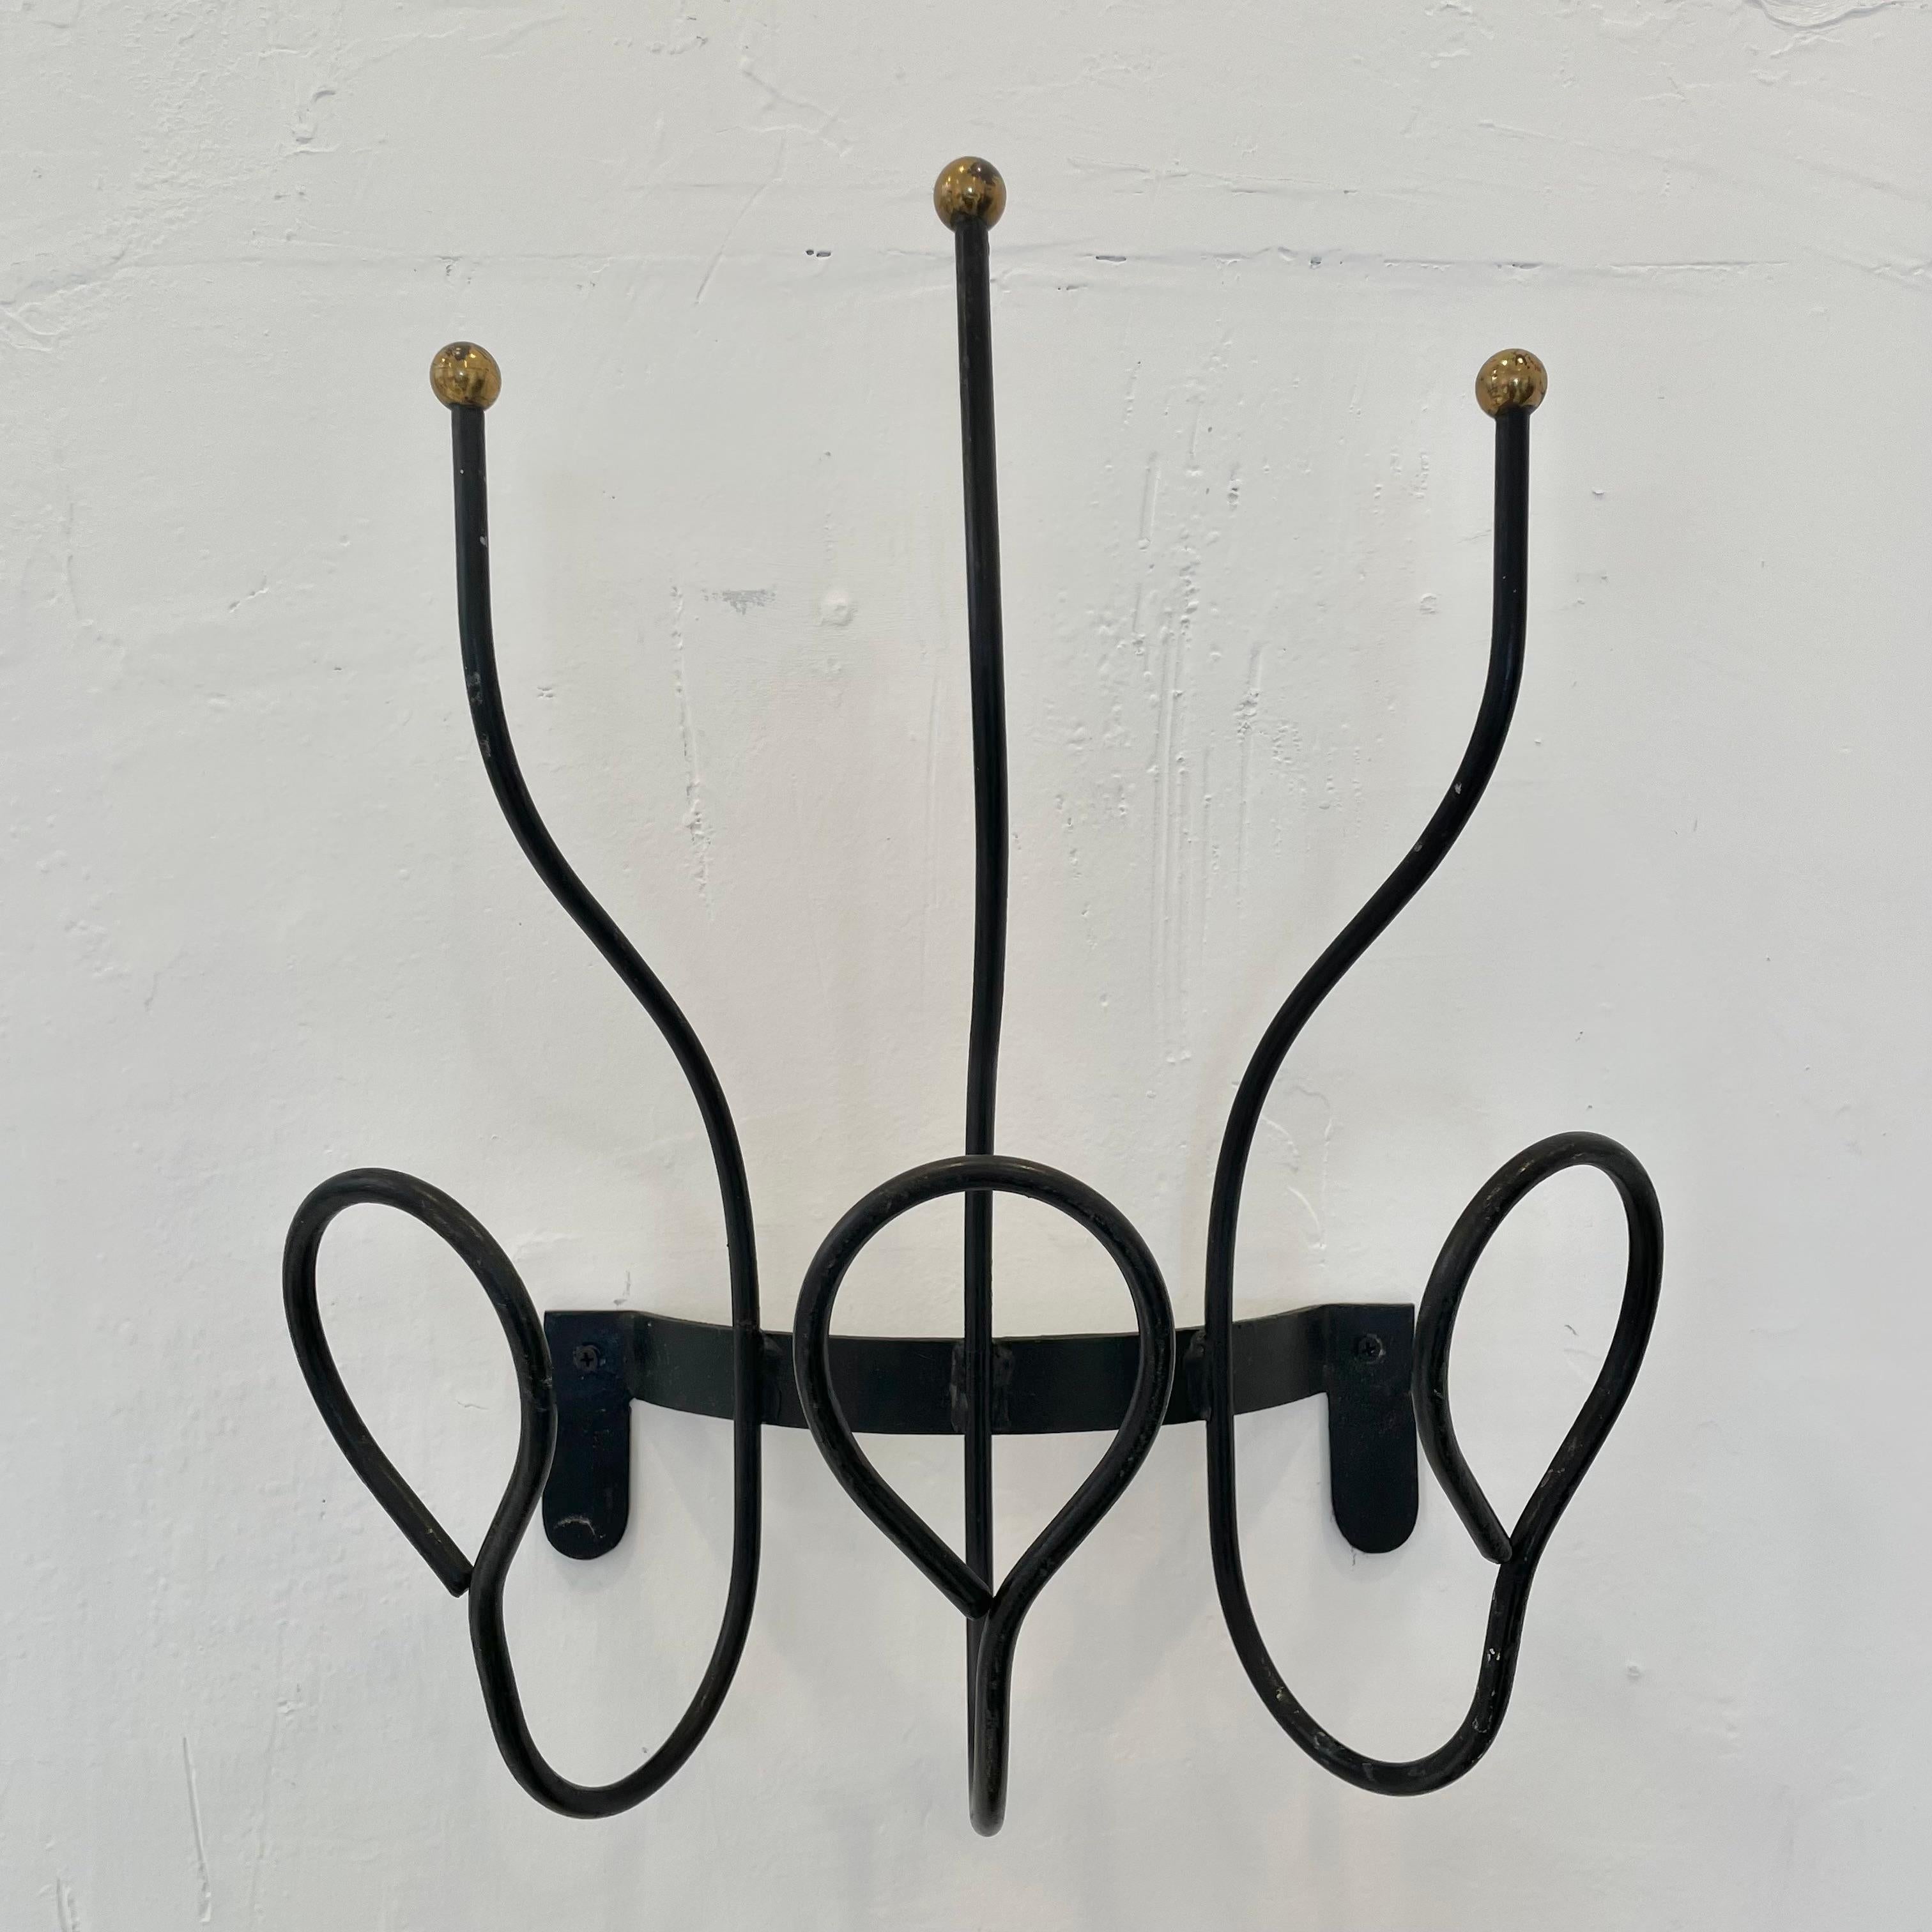 Handsome iron wall rack in the style of French designer Jacques Adnet. Good vintage condition. Iron frame with brass ball detailing at the top of each hook. Three tongue hooks along the bottom and three prong hooks at the top giving this piece a